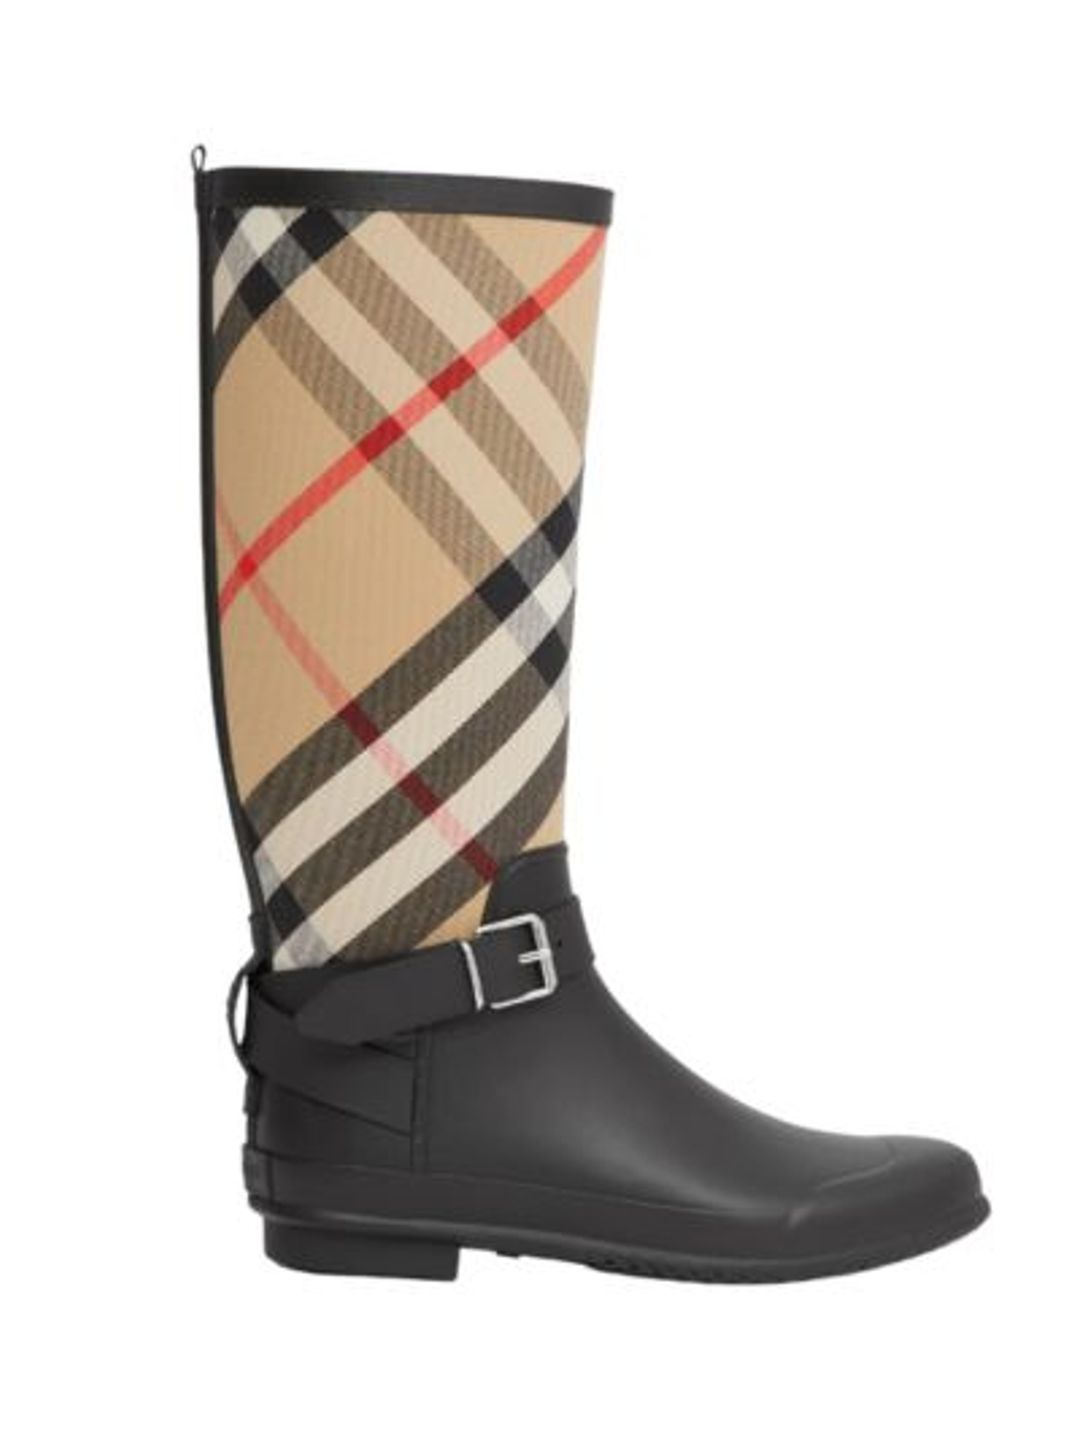 The 10 best pairs of designer wellington boots to shop this festival ...